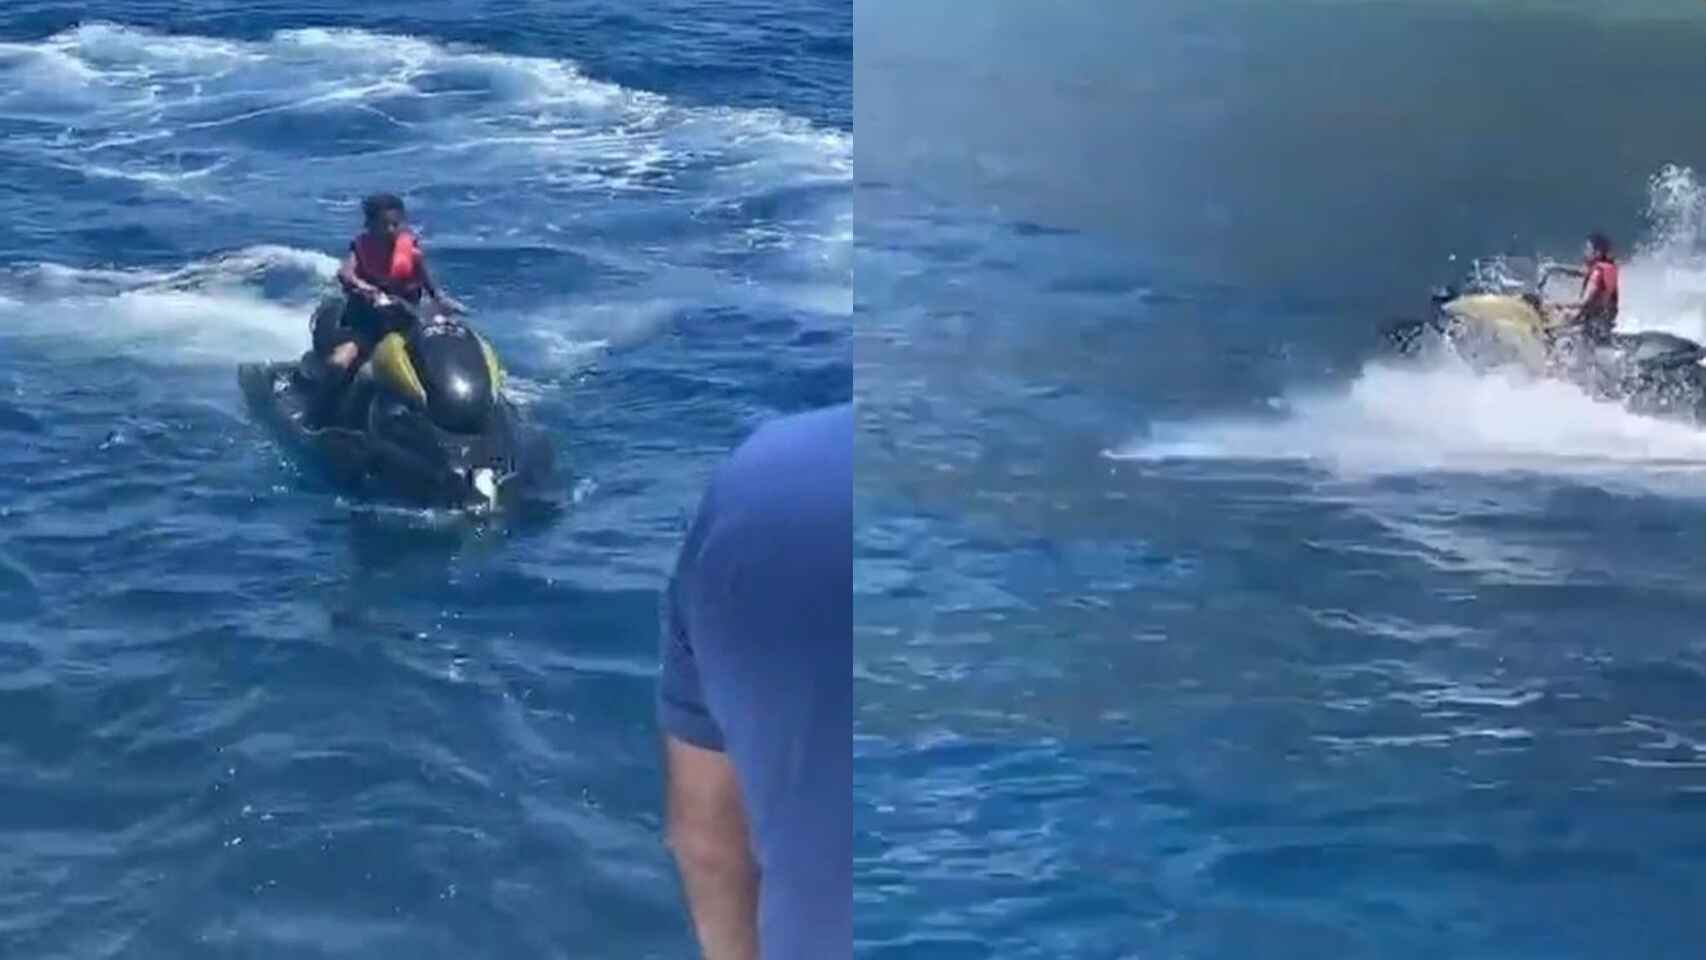 Police investigating after Cristiano Ronaldo’s 10-year-old son was filmed riding a jet ski alone in now-deleted video - Bóng Đá